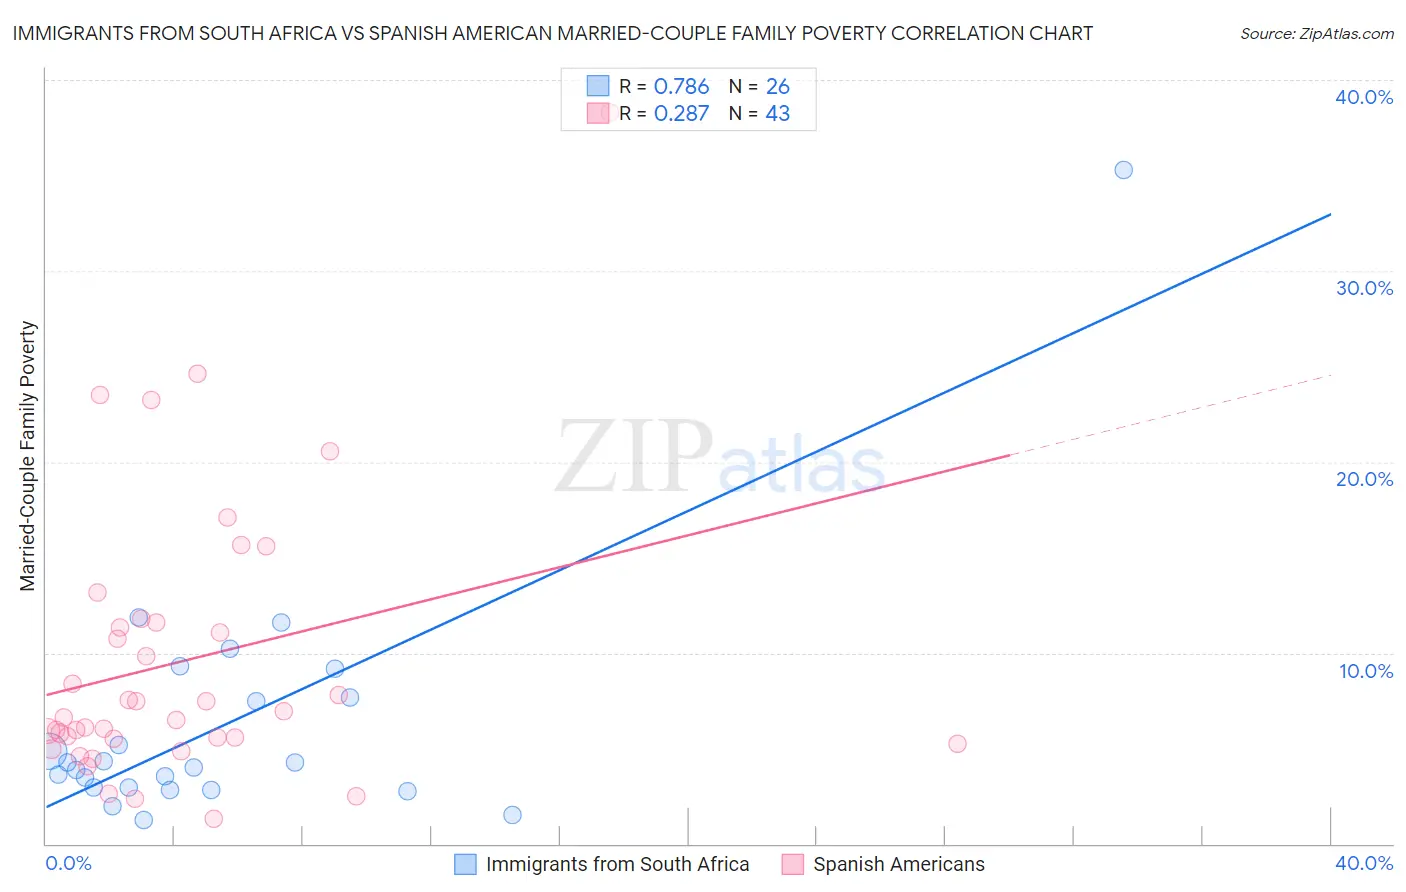 Immigrants from South Africa vs Spanish American Married-Couple Family Poverty